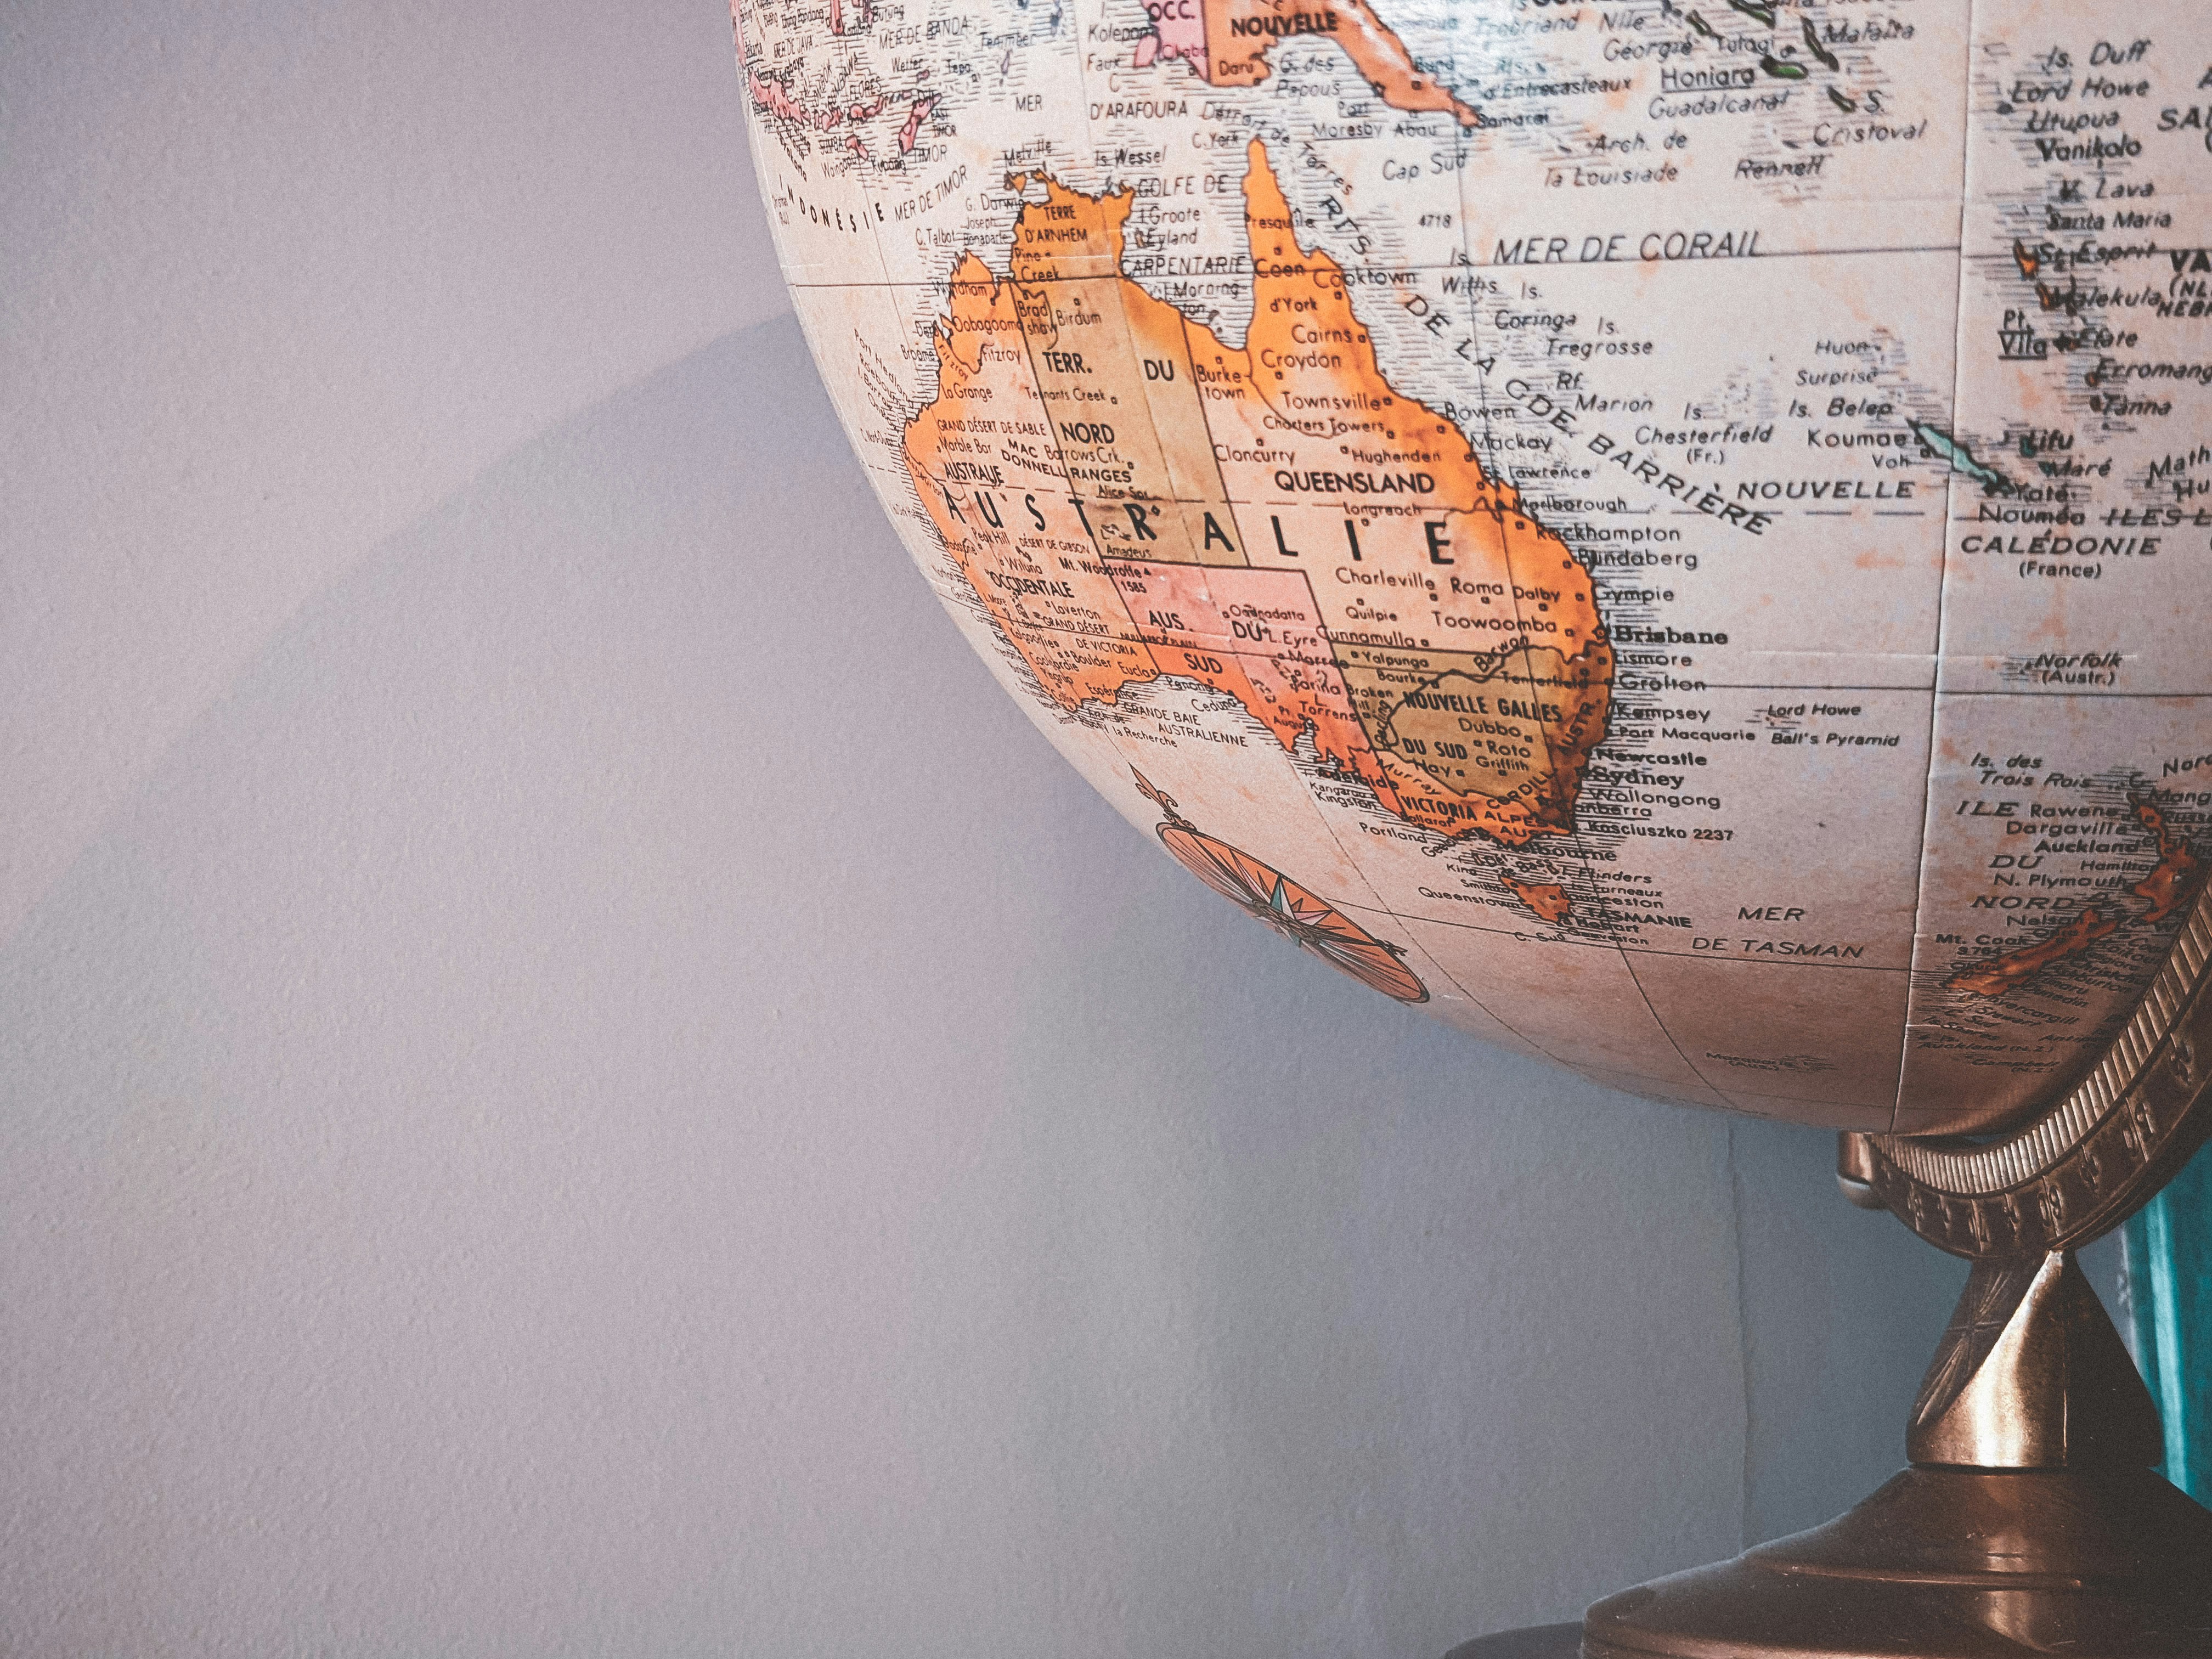 Photo of the bottom half of a globe, showing Australia and southeast Asia